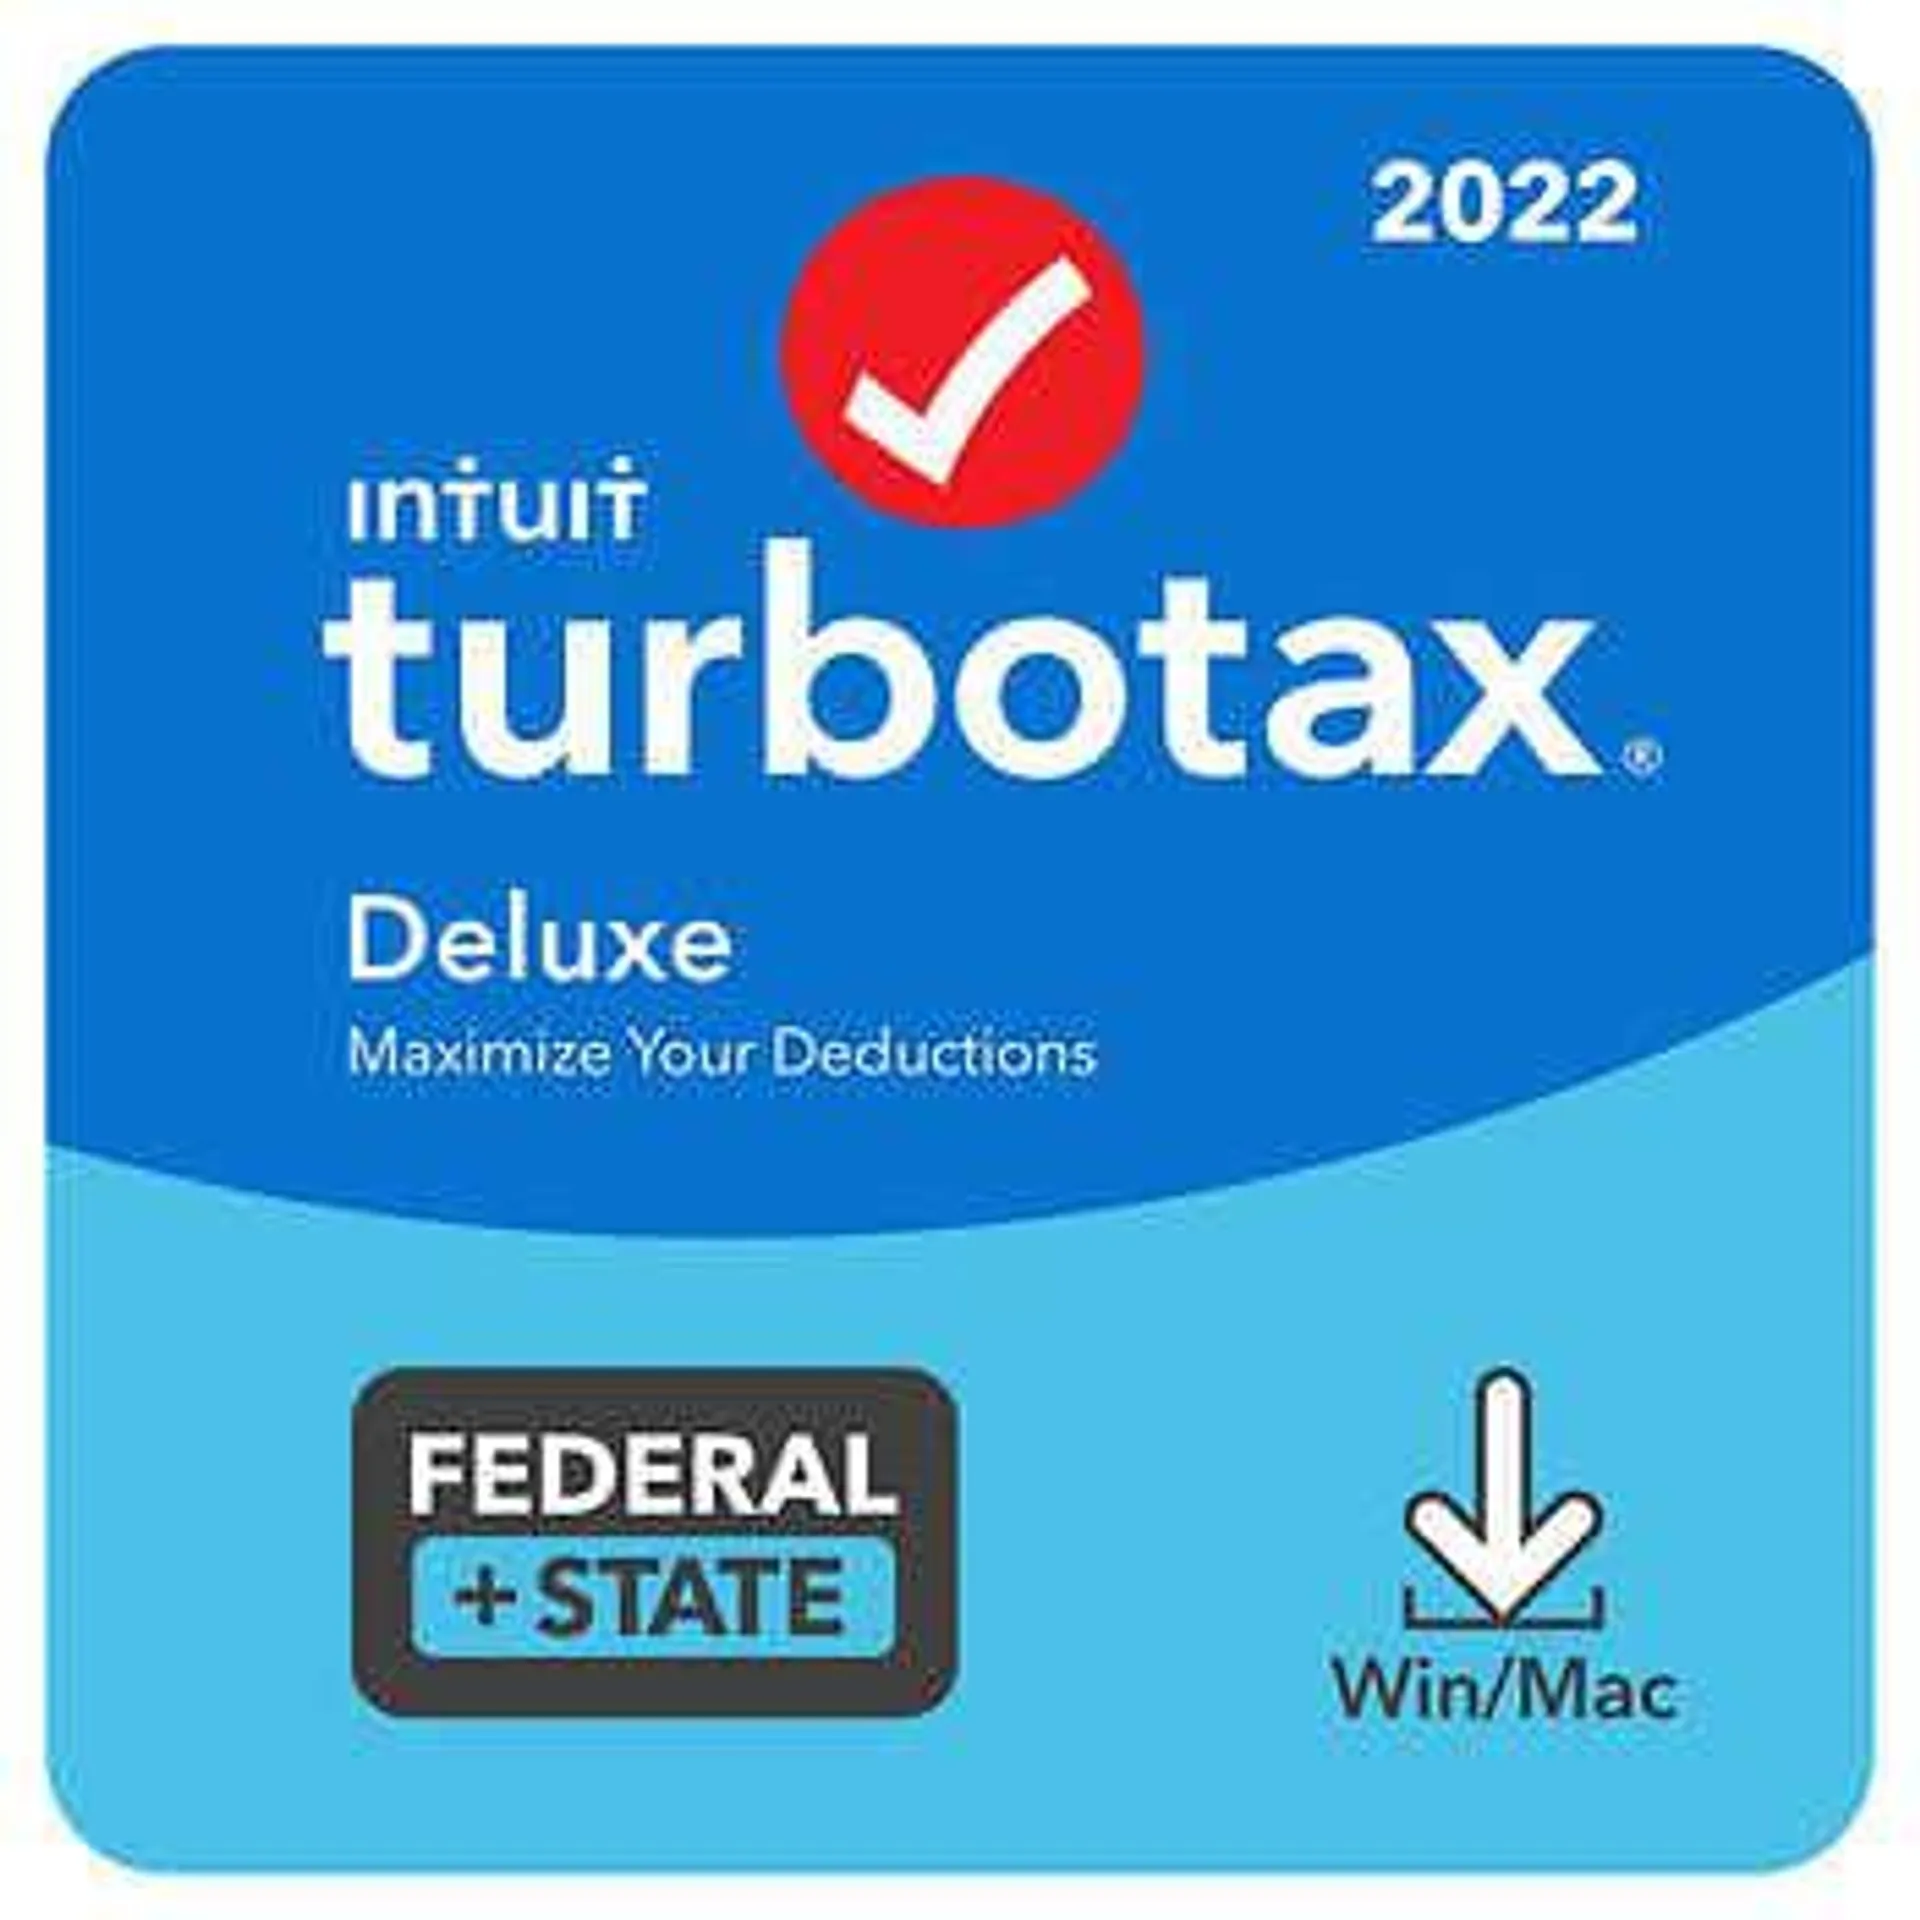 TurboTax Deluxe 2022 Federal E-File + State Download, for PC/Mac, Includes $10 Credit In-Product*